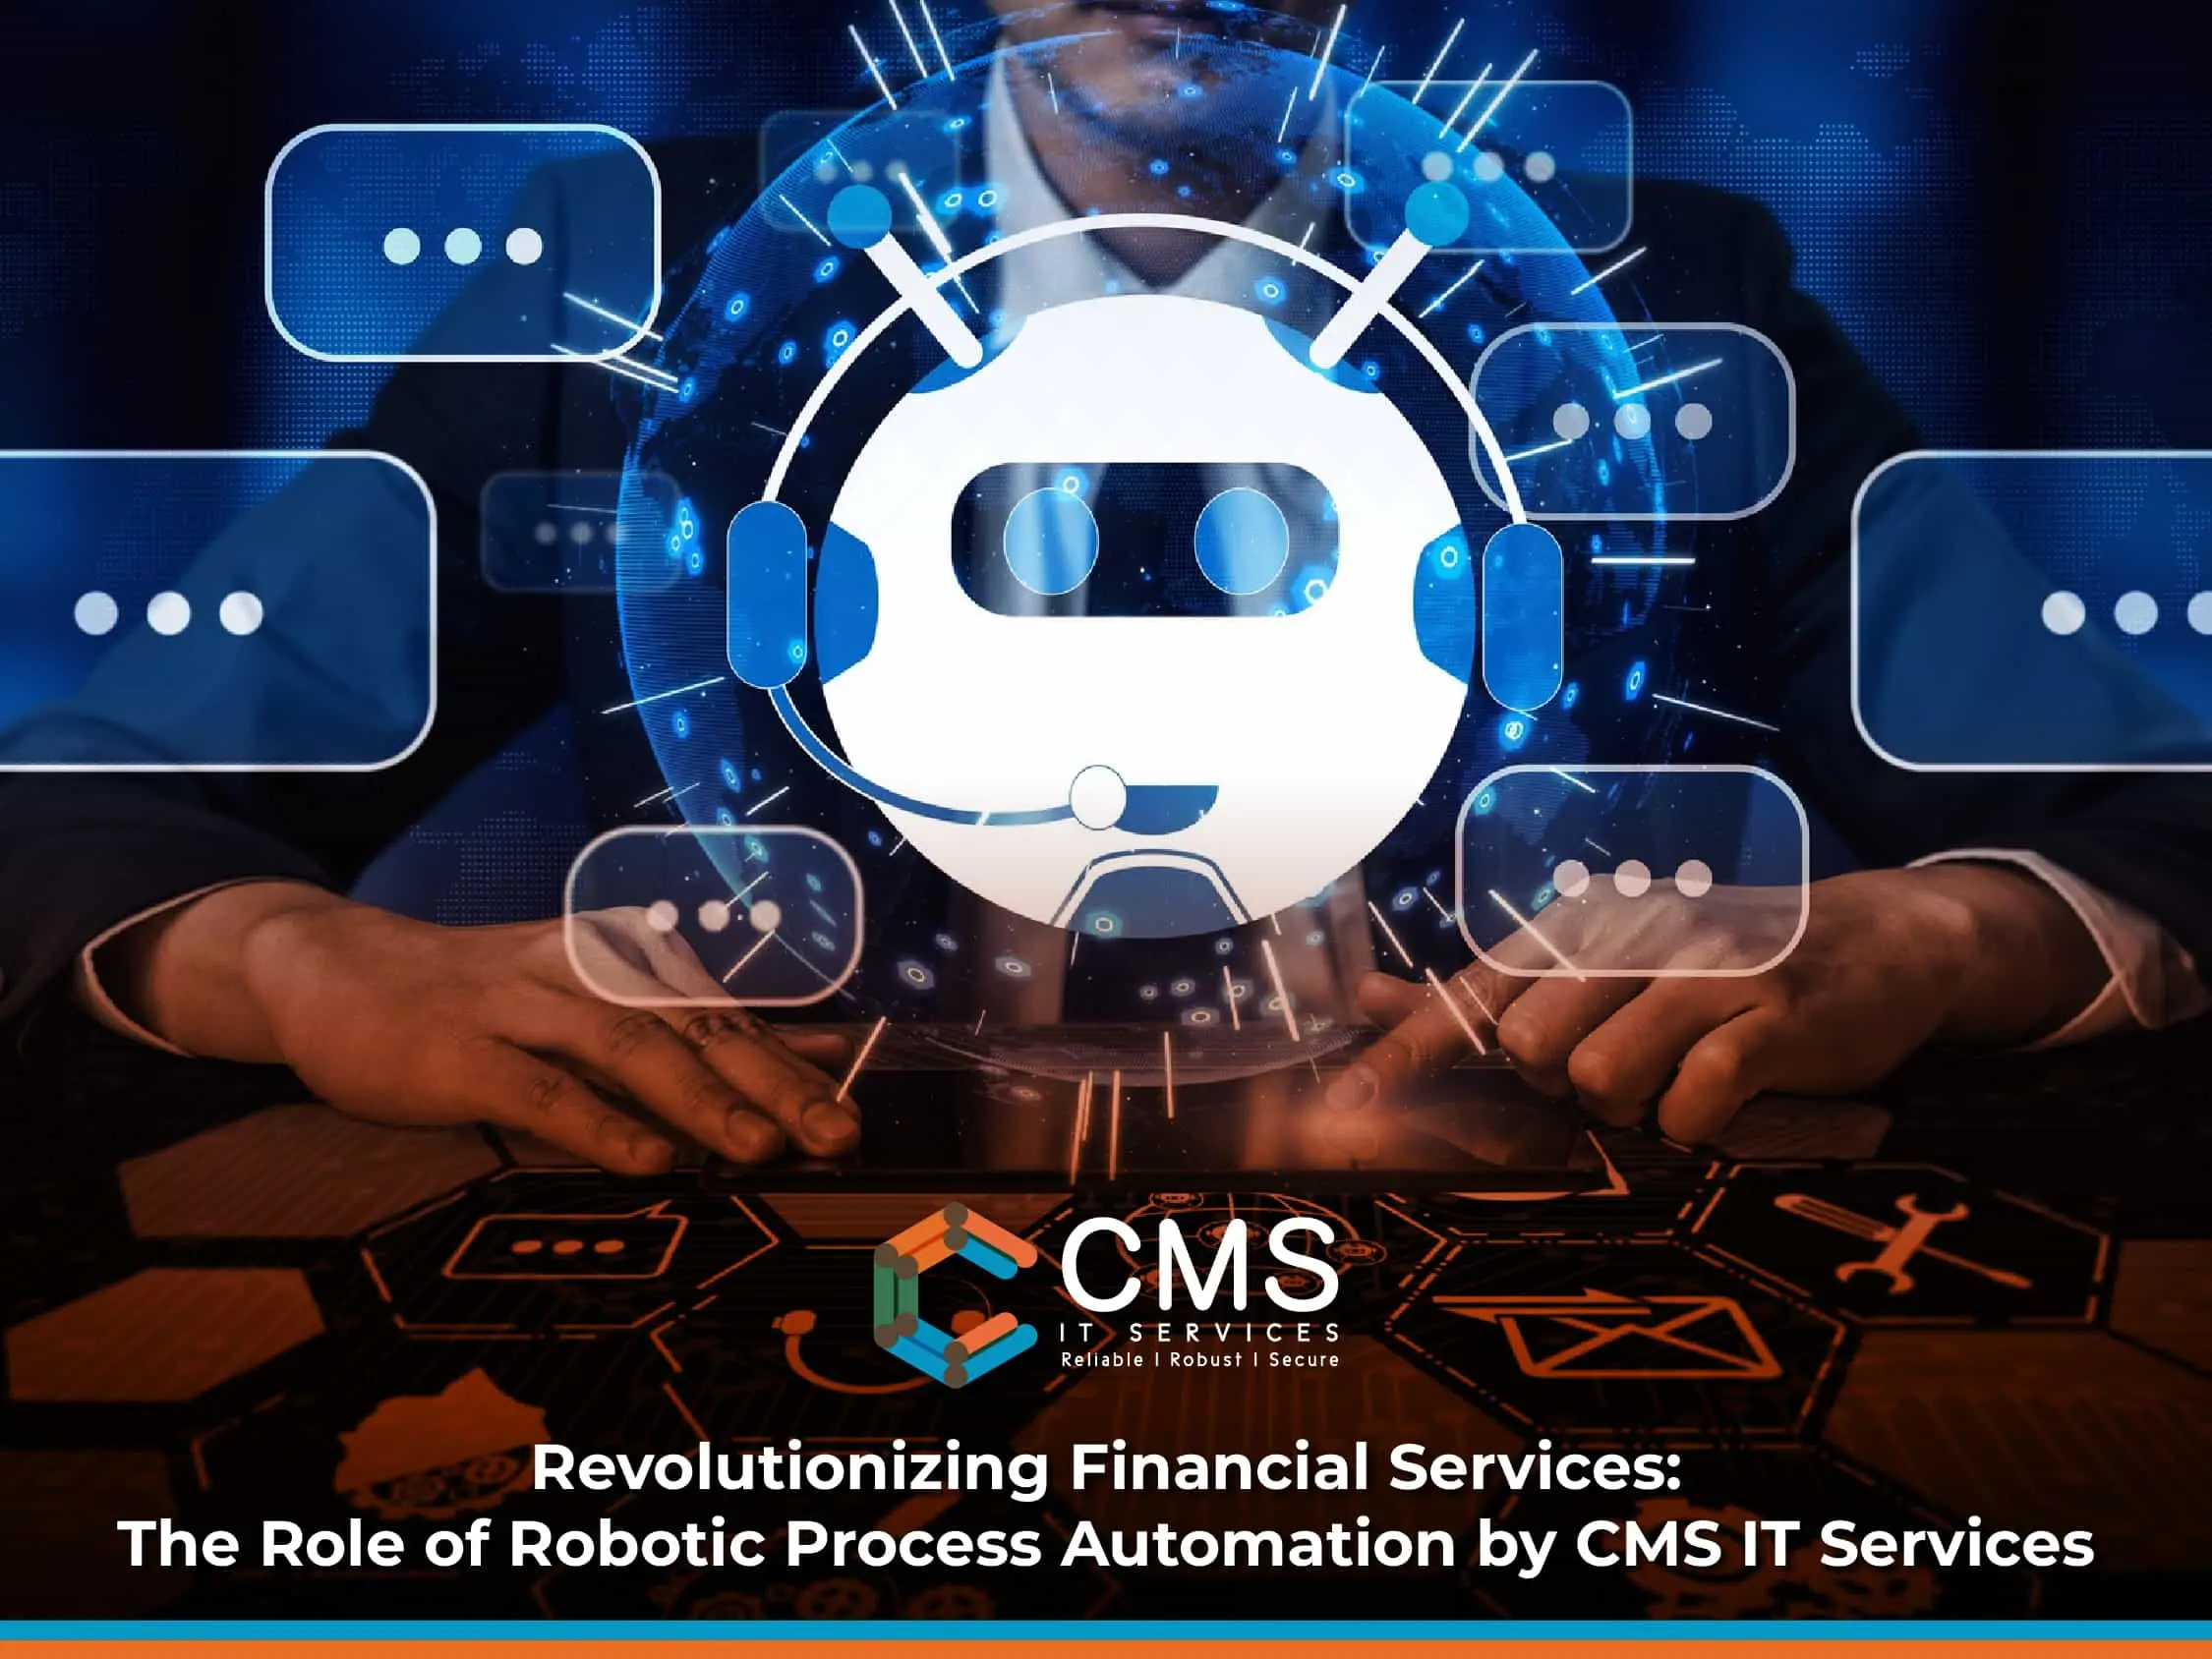 Robotic Process Automation in Financial Services